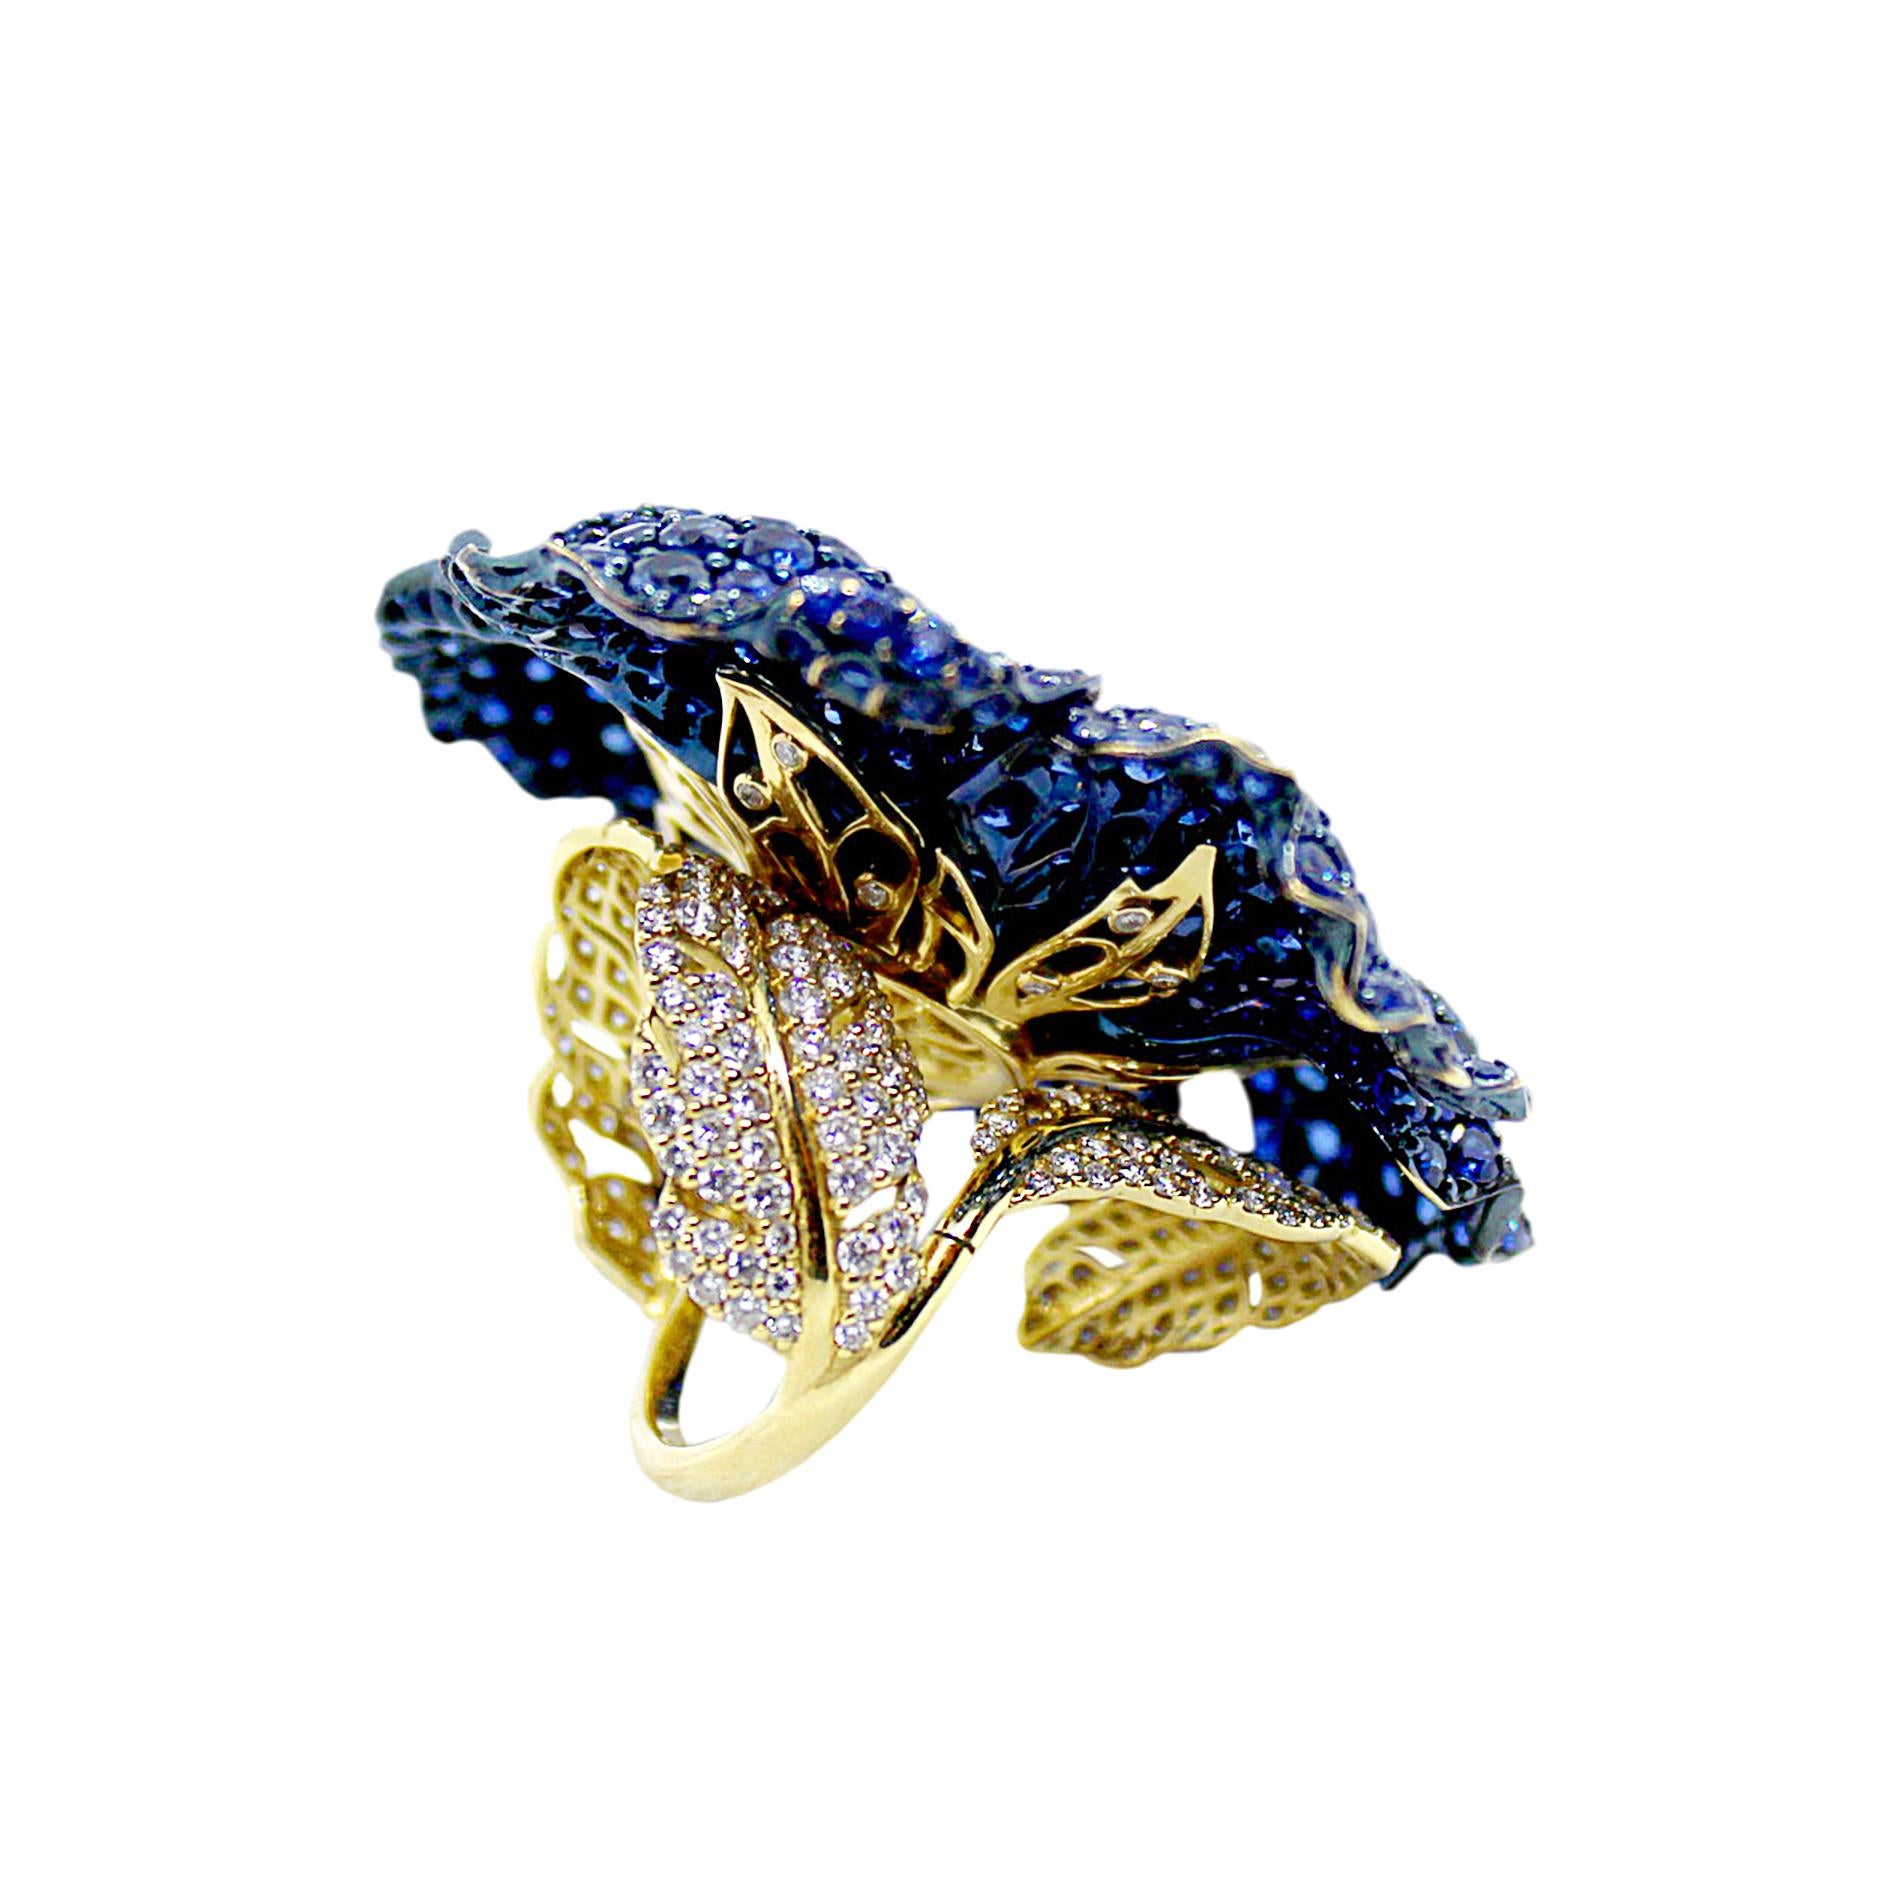 Sybarite Jewellery is a London-based luxury brand crafting outstanding pieces, incomparable both in design and in execution. Spearheaded by founder Margarita Prykhodko, a former architect and engineer, each piece is a fusion of artistry and